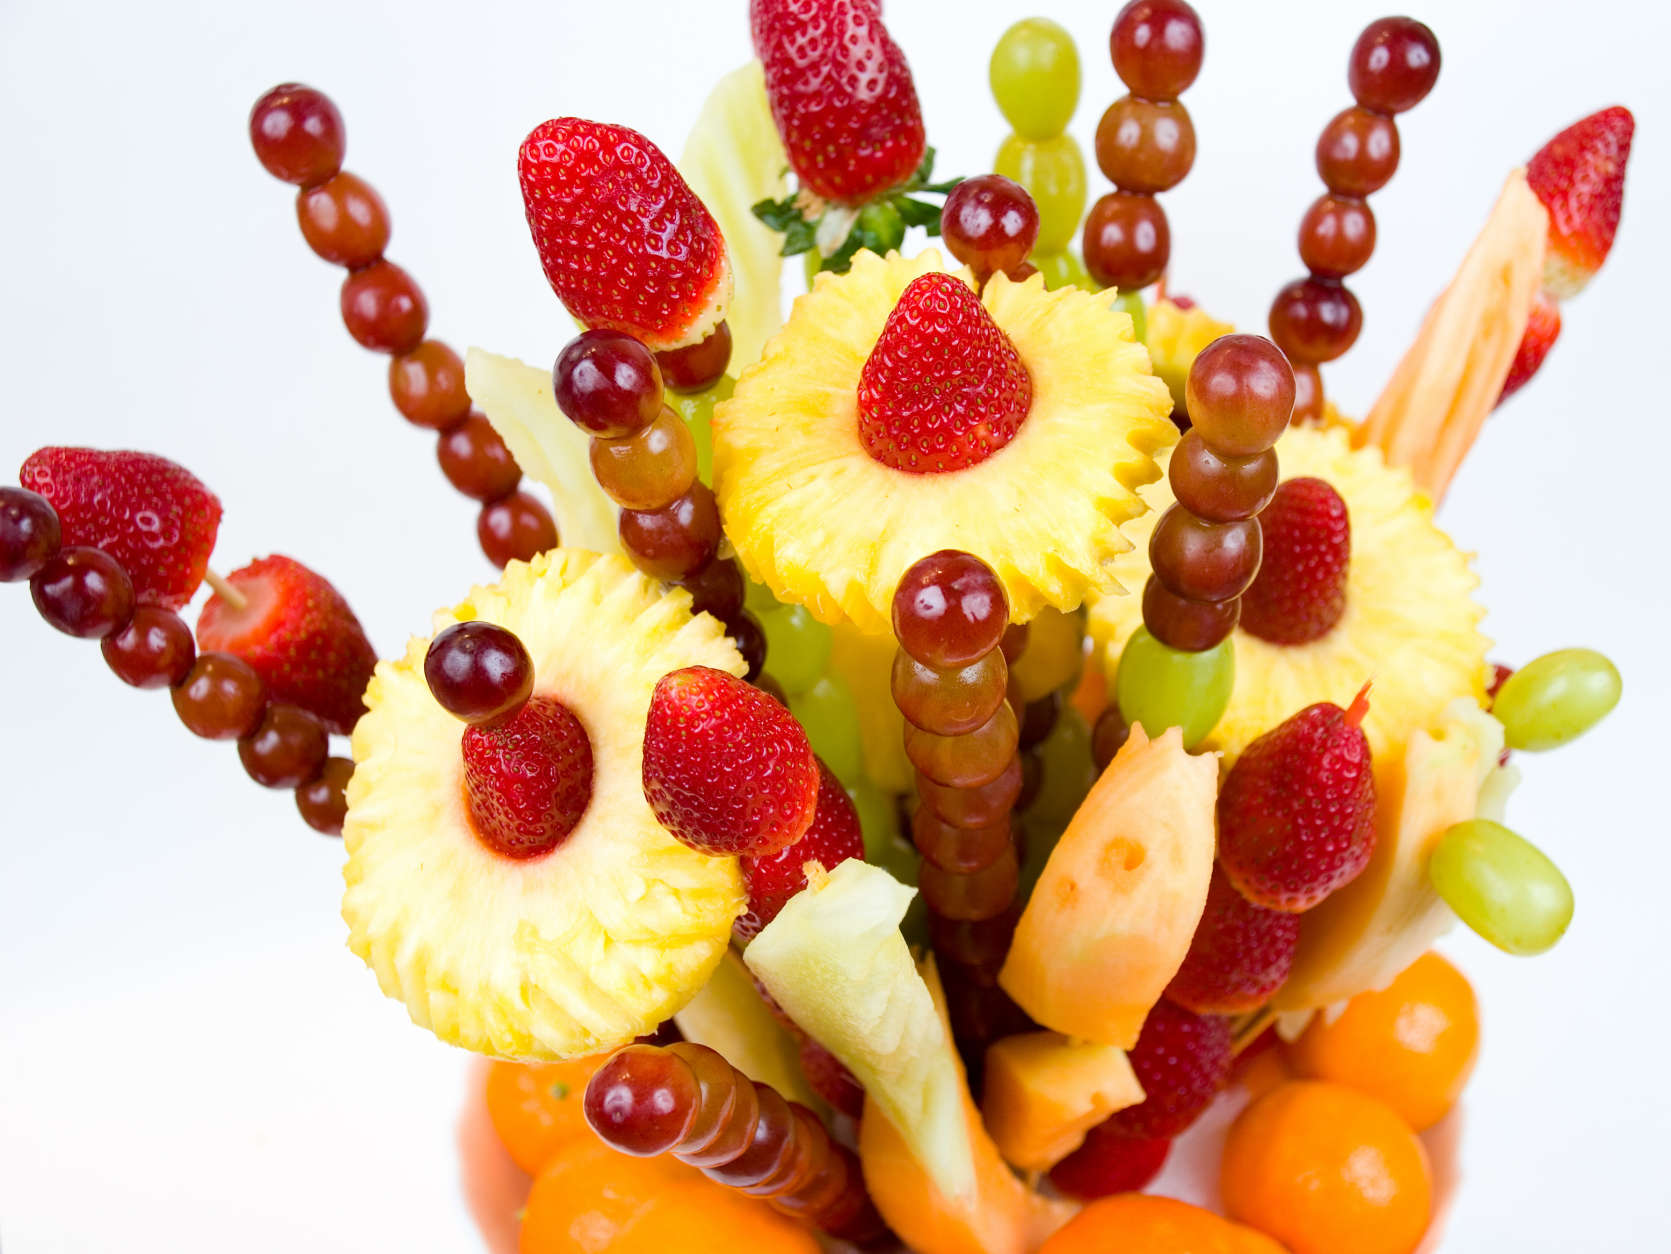 A fruit bouquet shot with shallow DOF on a white background